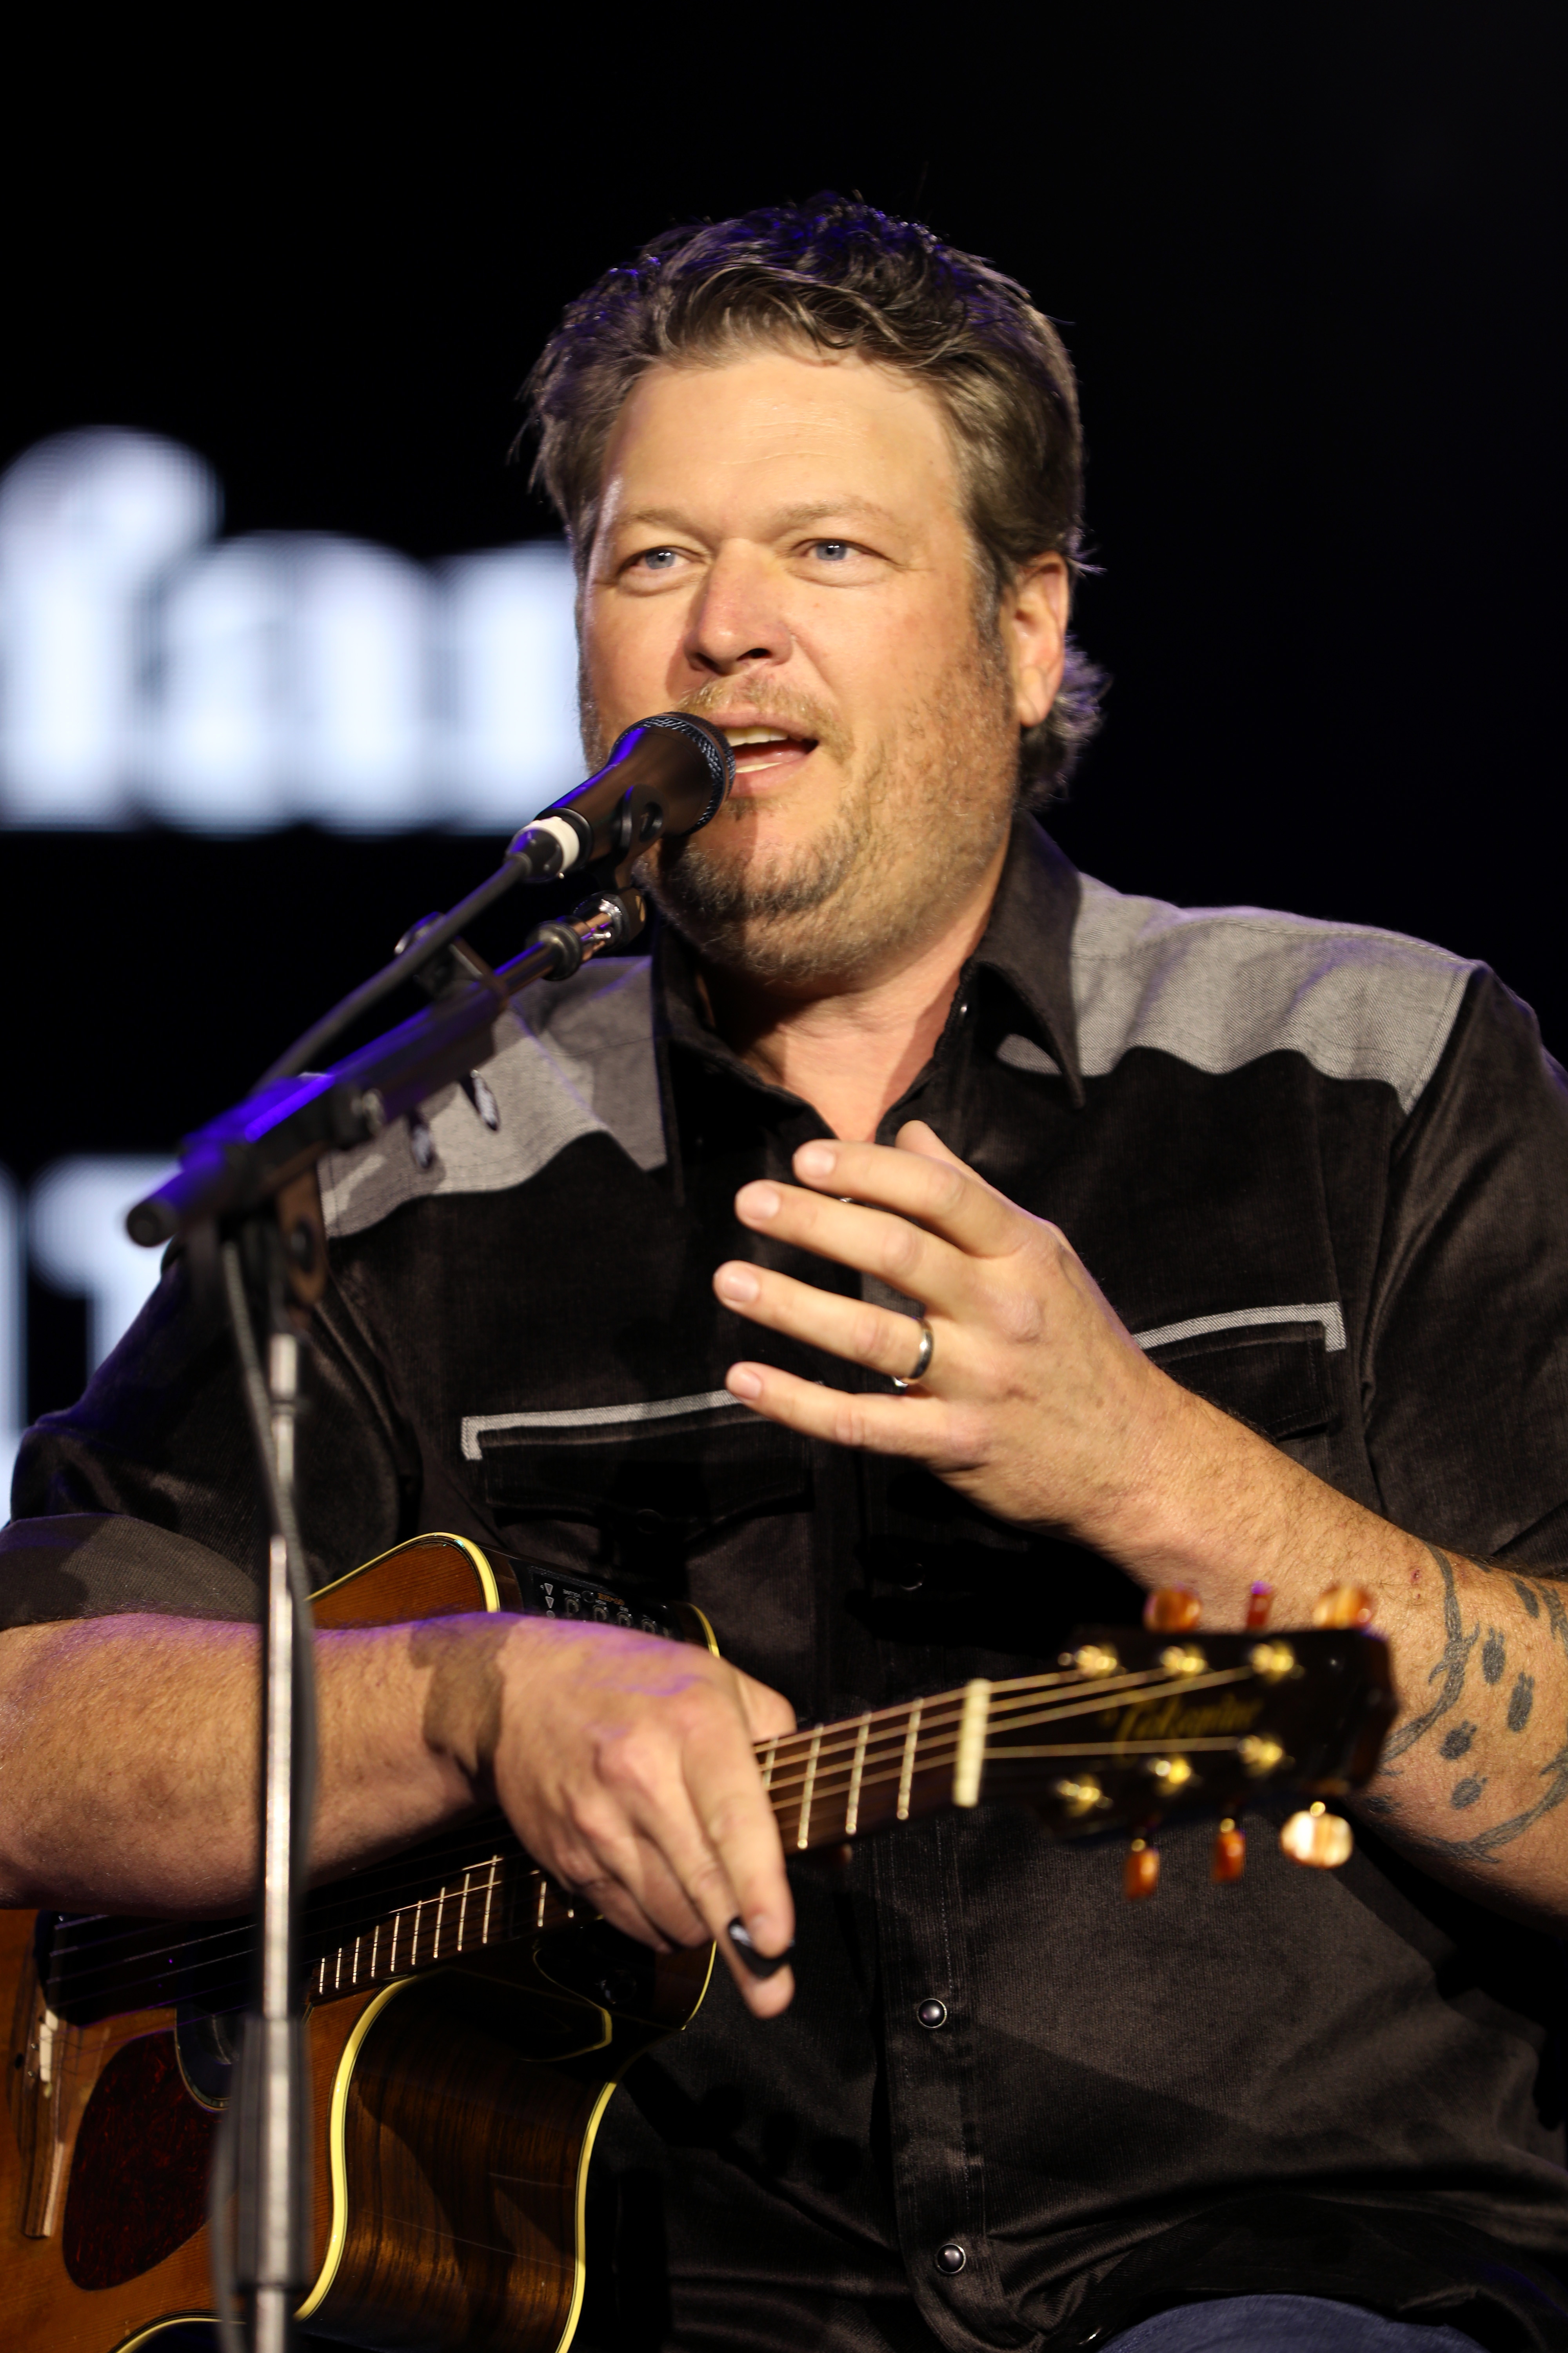 Blake Shelton performing at the Warner Music Nashville Lunch during CRS 2024 in Nashville, Tennessee on February 28, 2024 | Source: Getty Images